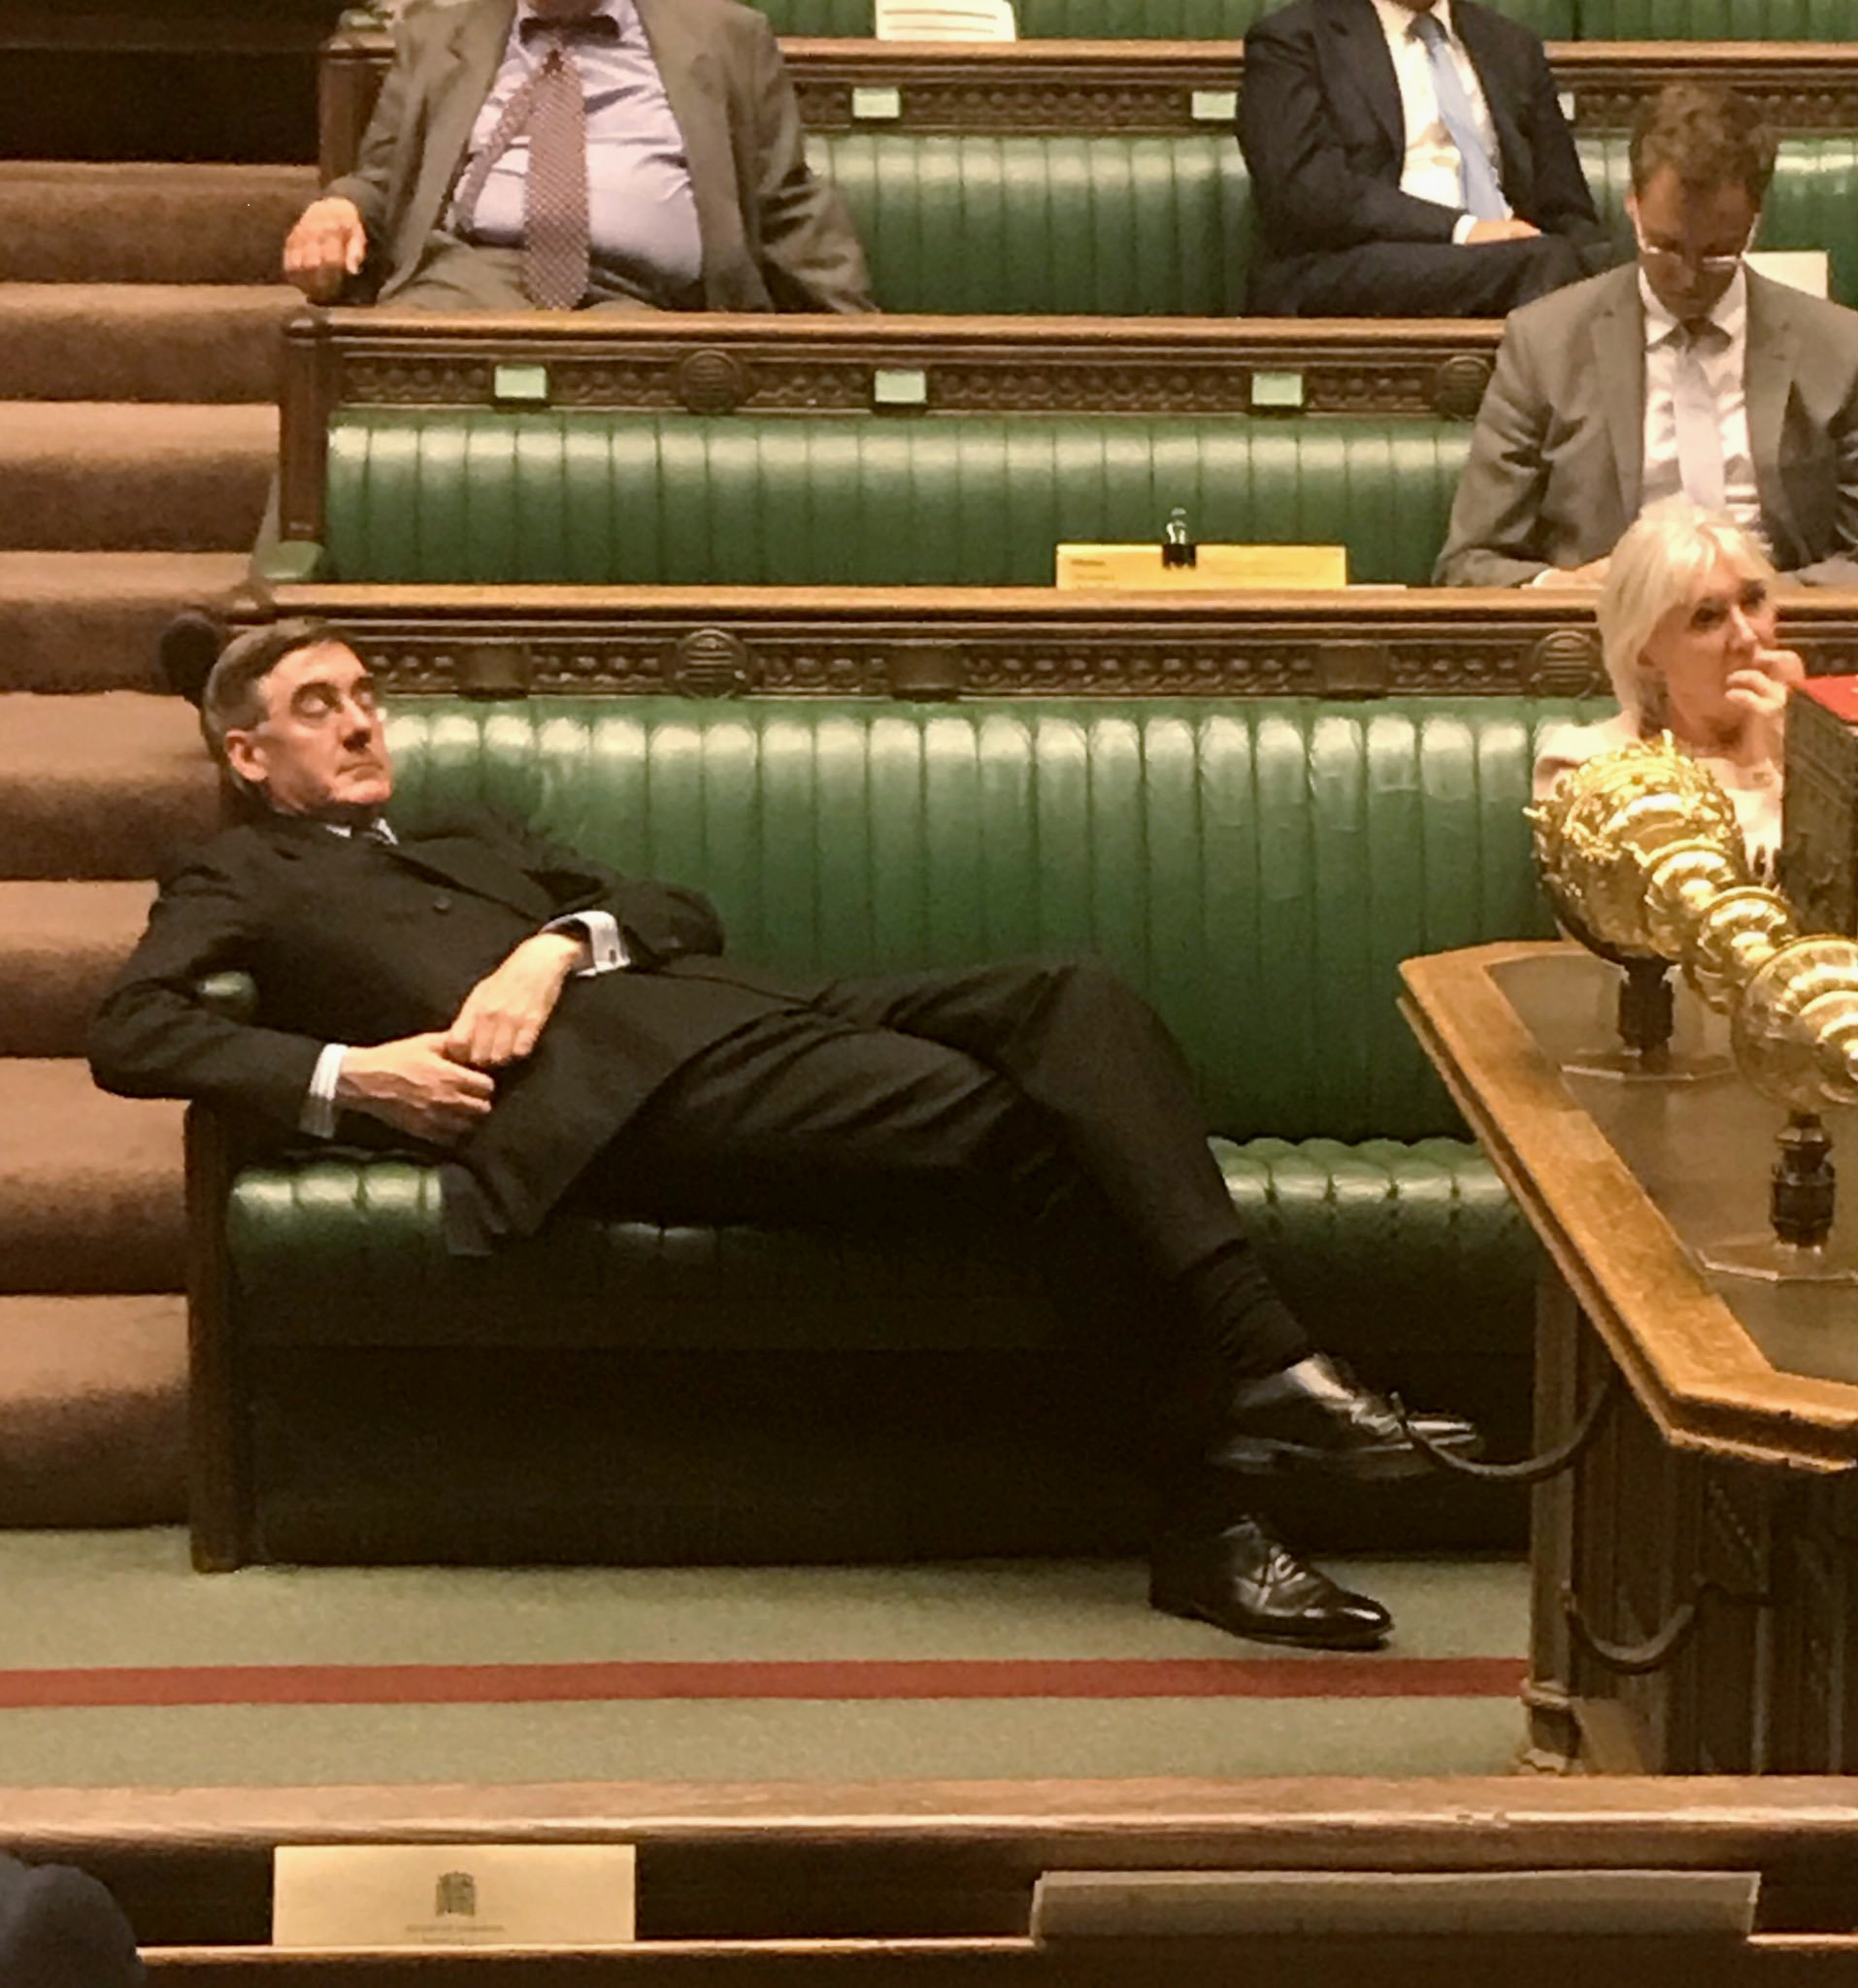 The Leader of the House of Commons Jacob Rees-Mogg lounging languidly along the front bench during a historic Brexit debate was criticized as physical embodiment of arrogance, entitlement, disrespect and contempt for the parliament, London, September 3, 2019.